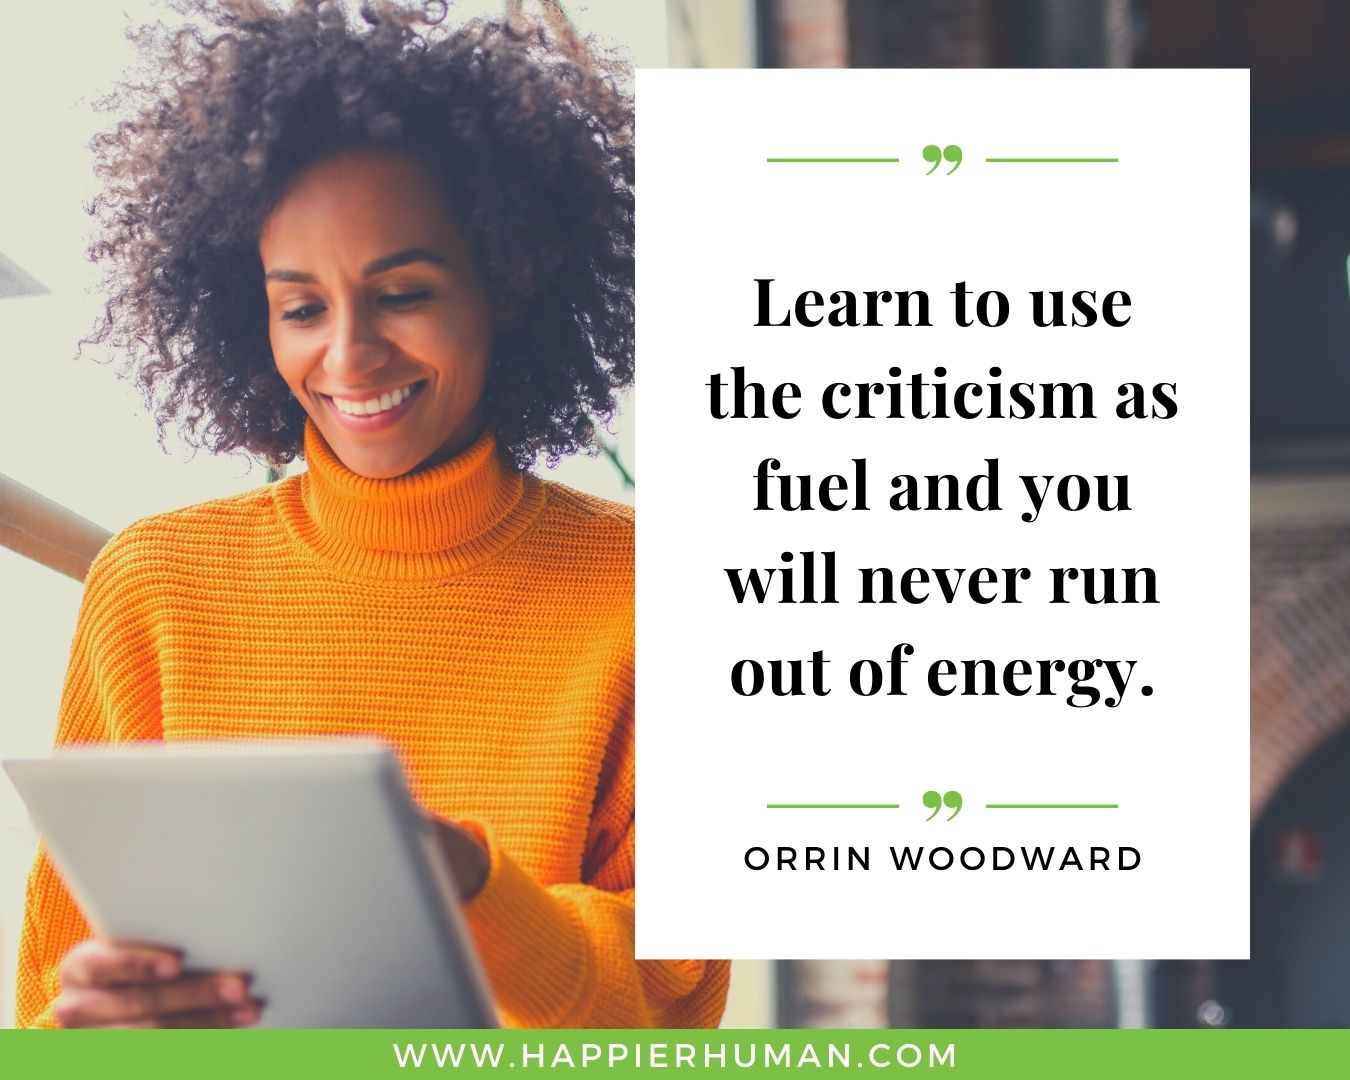 Haters Quotes - “Learn to use the criticism as fuel and you will never run out of energy.” - Orrin Woodward